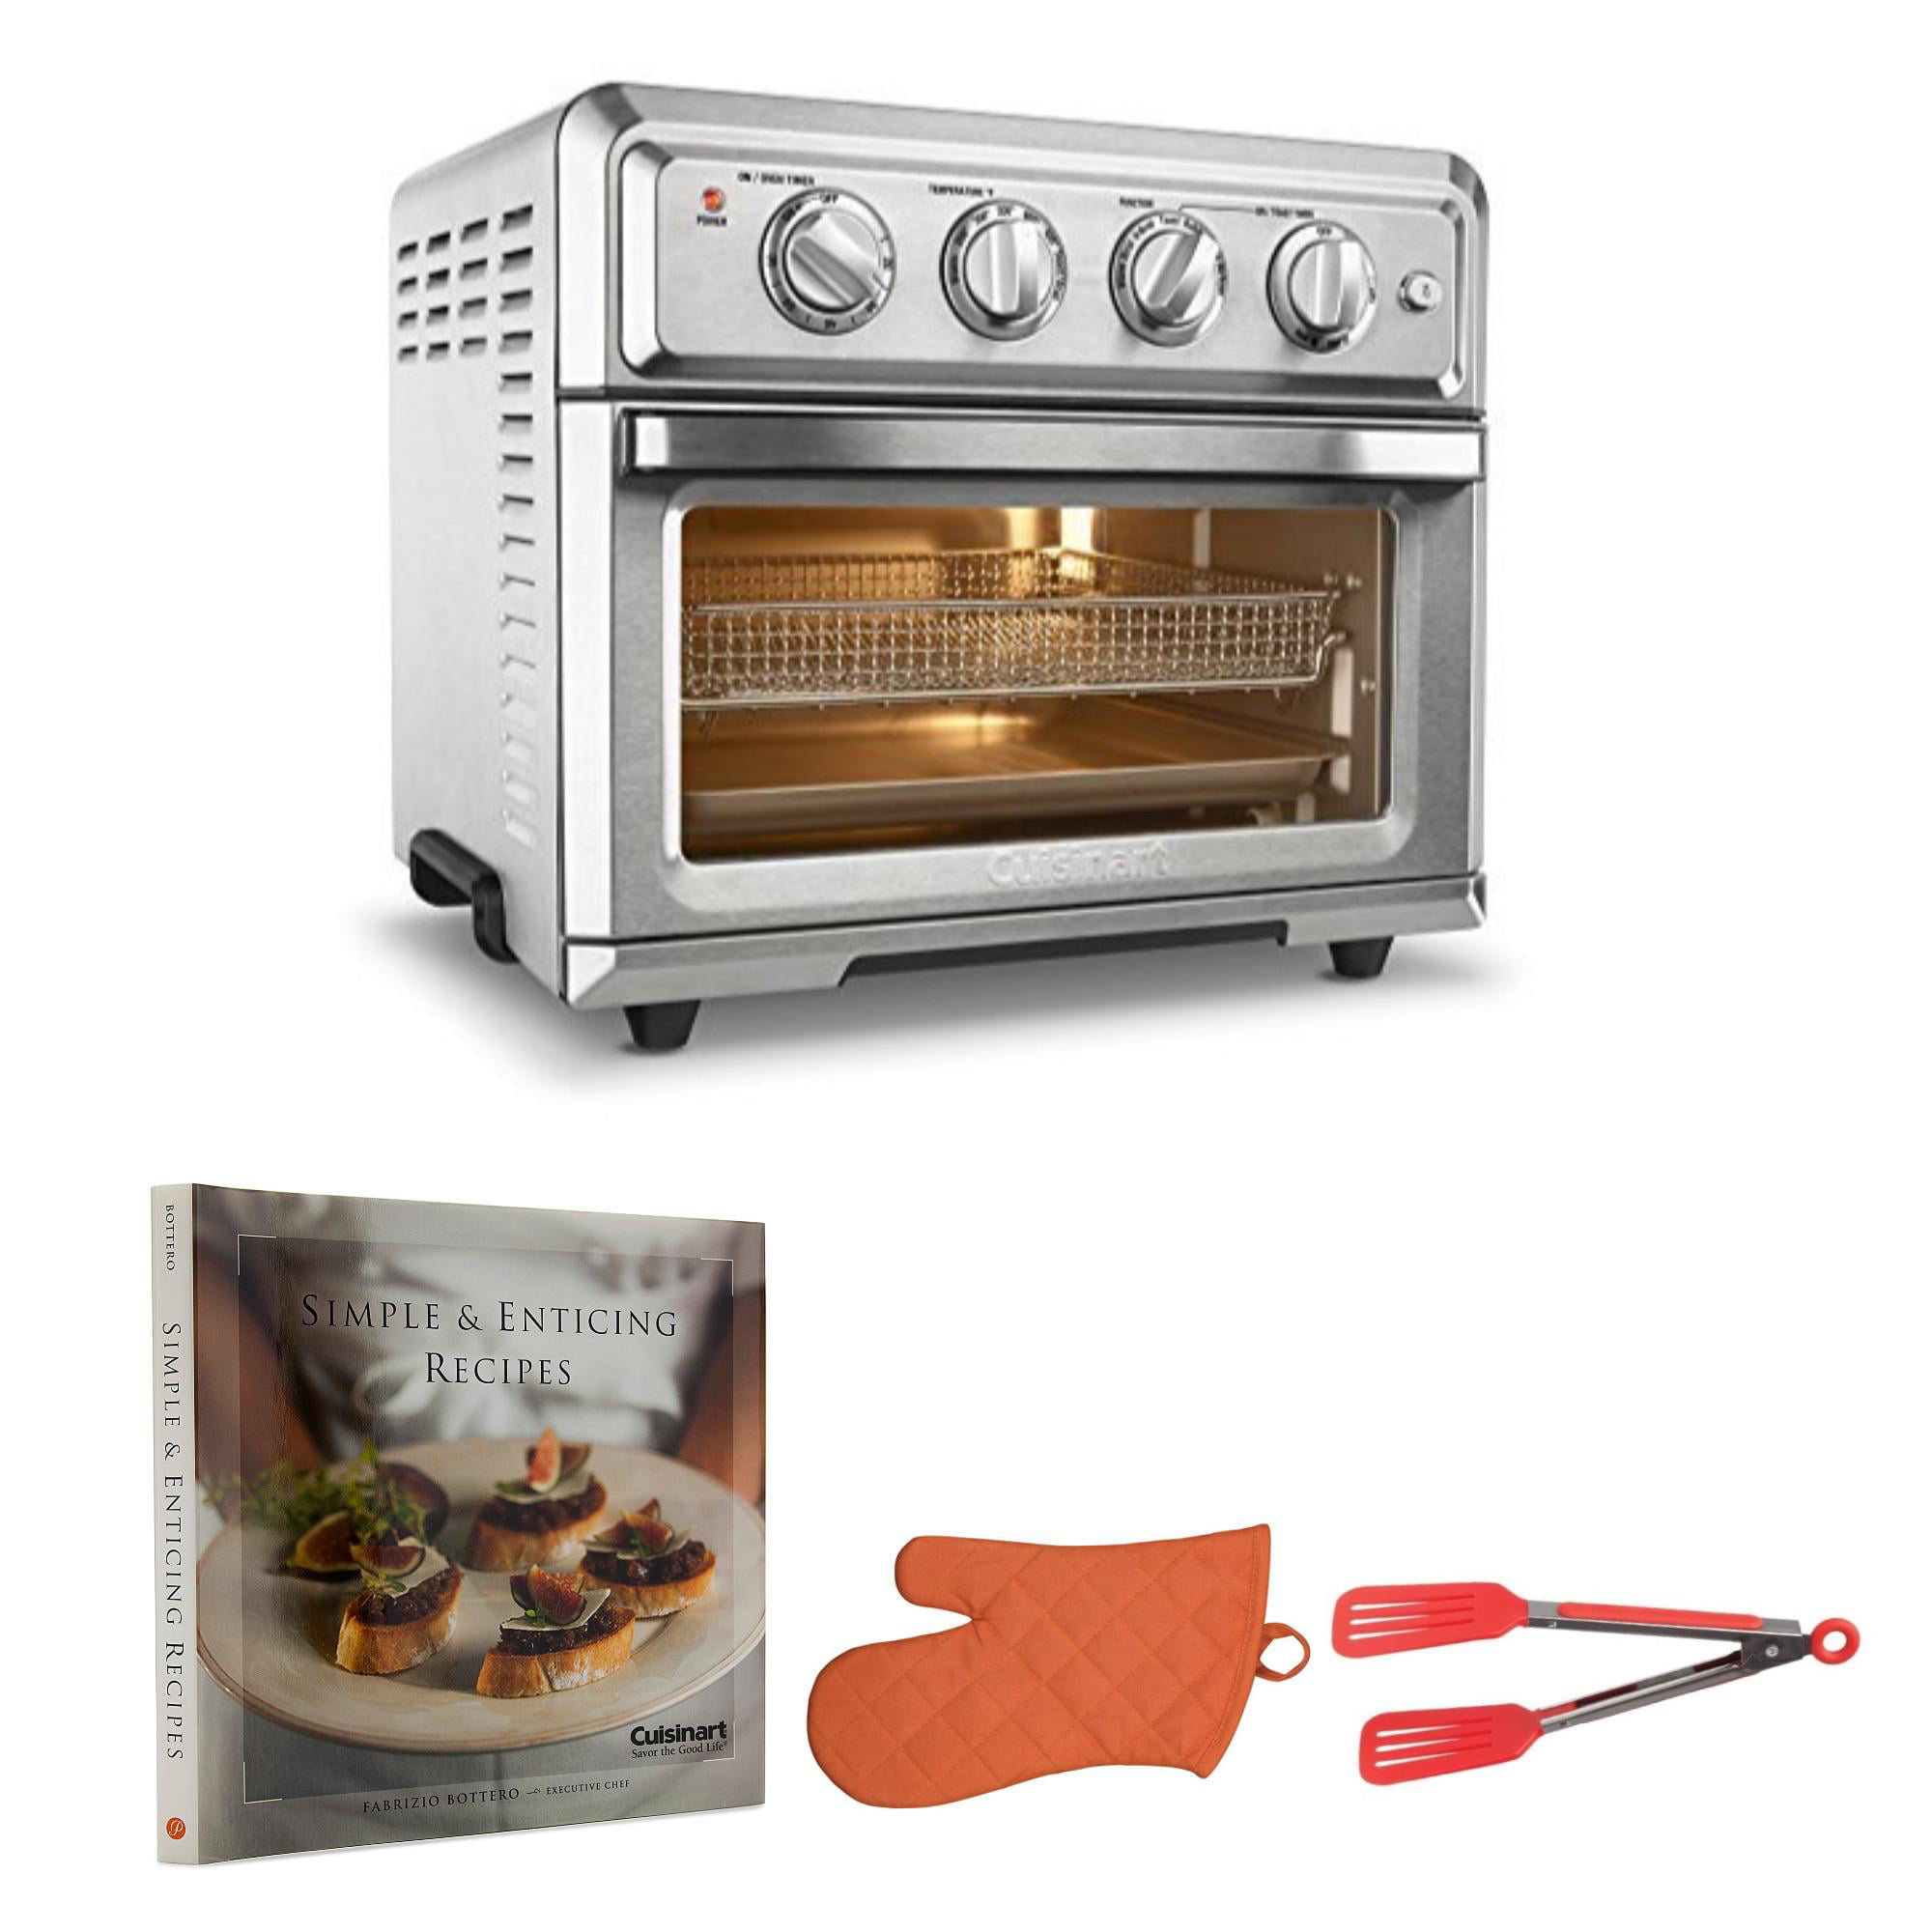 Cuisinart TOA-60 Air Fryer Convection Oven with Cookbook, Oven Mitt, and Fl...